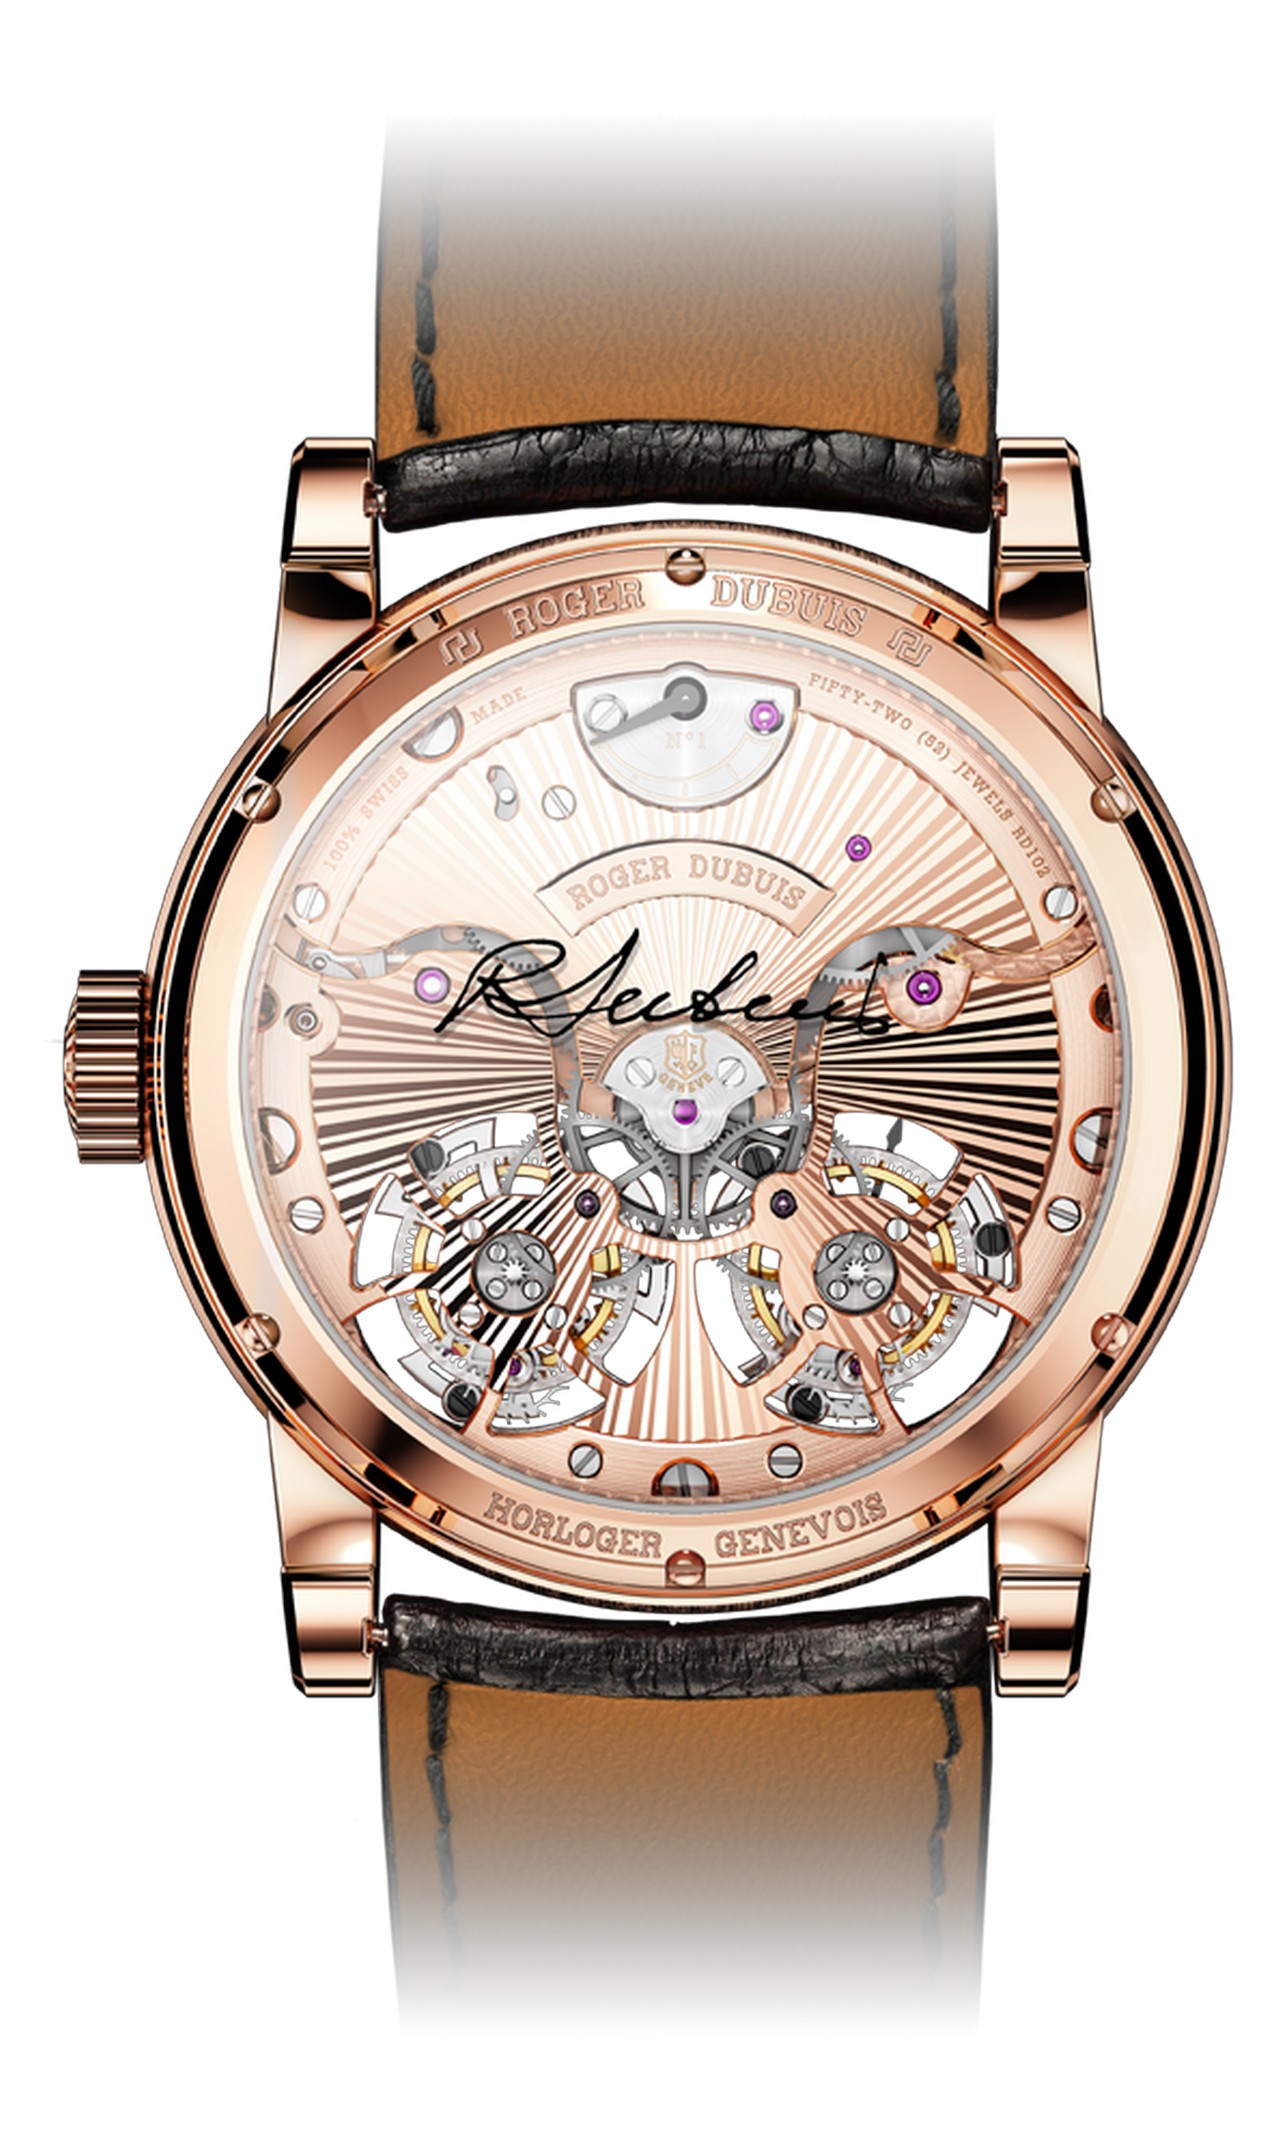 RDDBHO0571 Roger Dubuis Hommage Collection